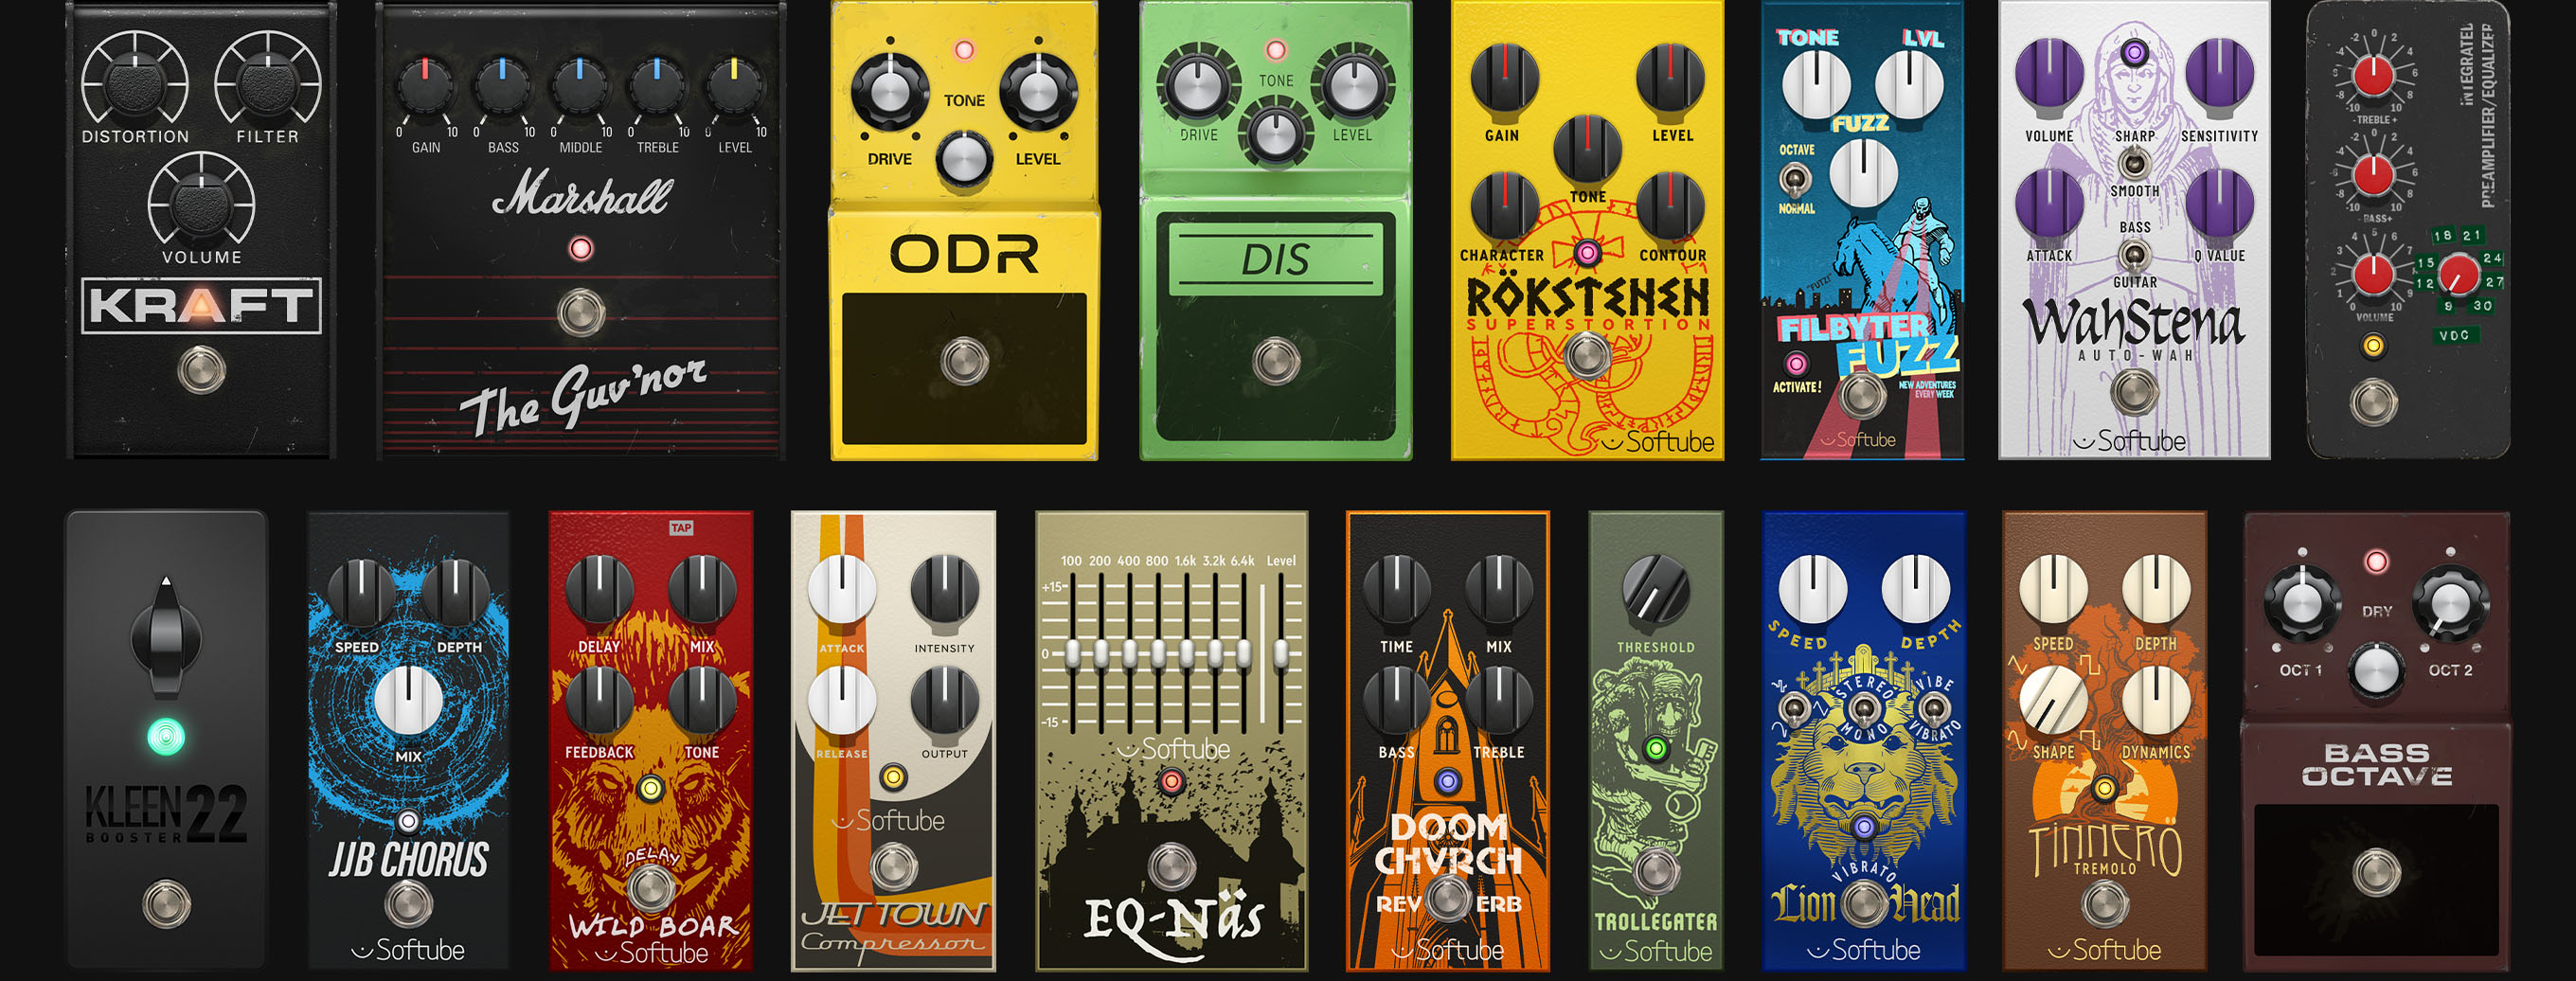 amp-room-1.6-whats-included-pedals.jpg